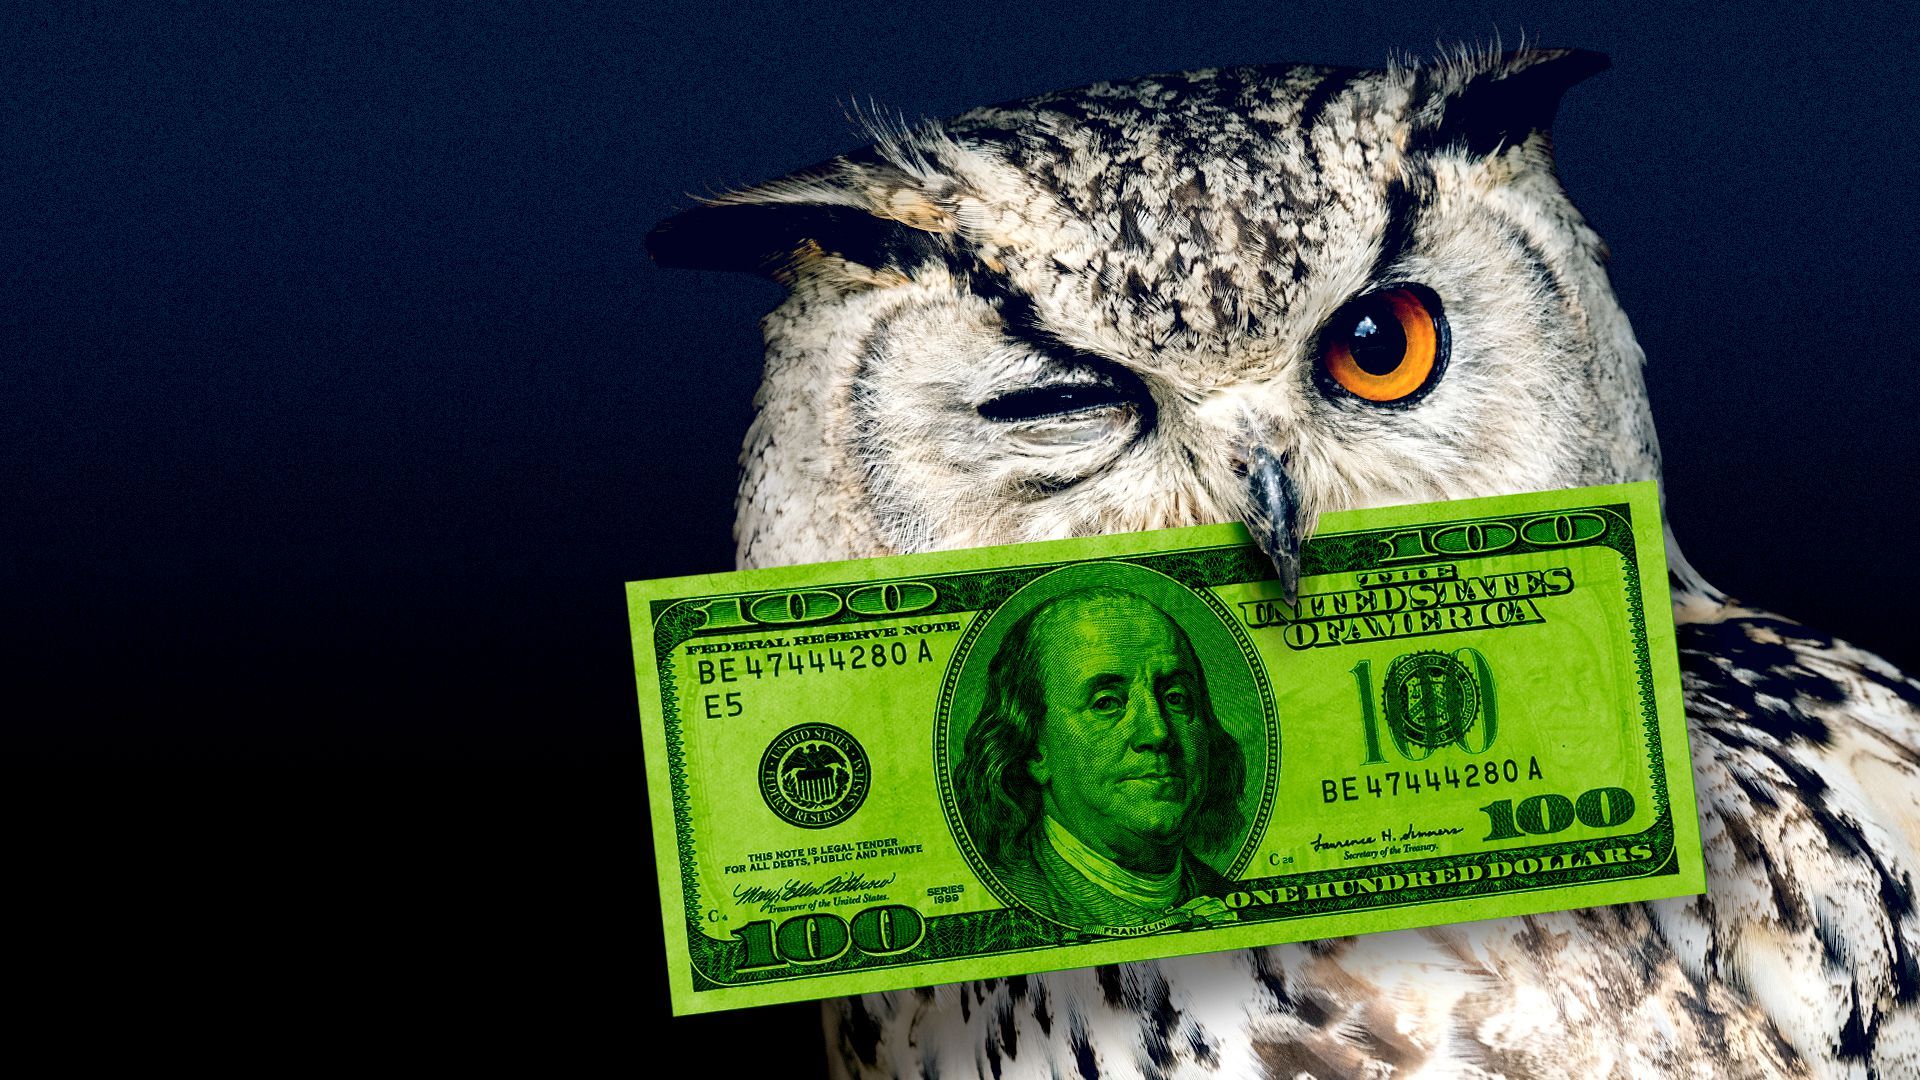 Illustration of an owl winking while holding a one hundred dollar bill in its beak